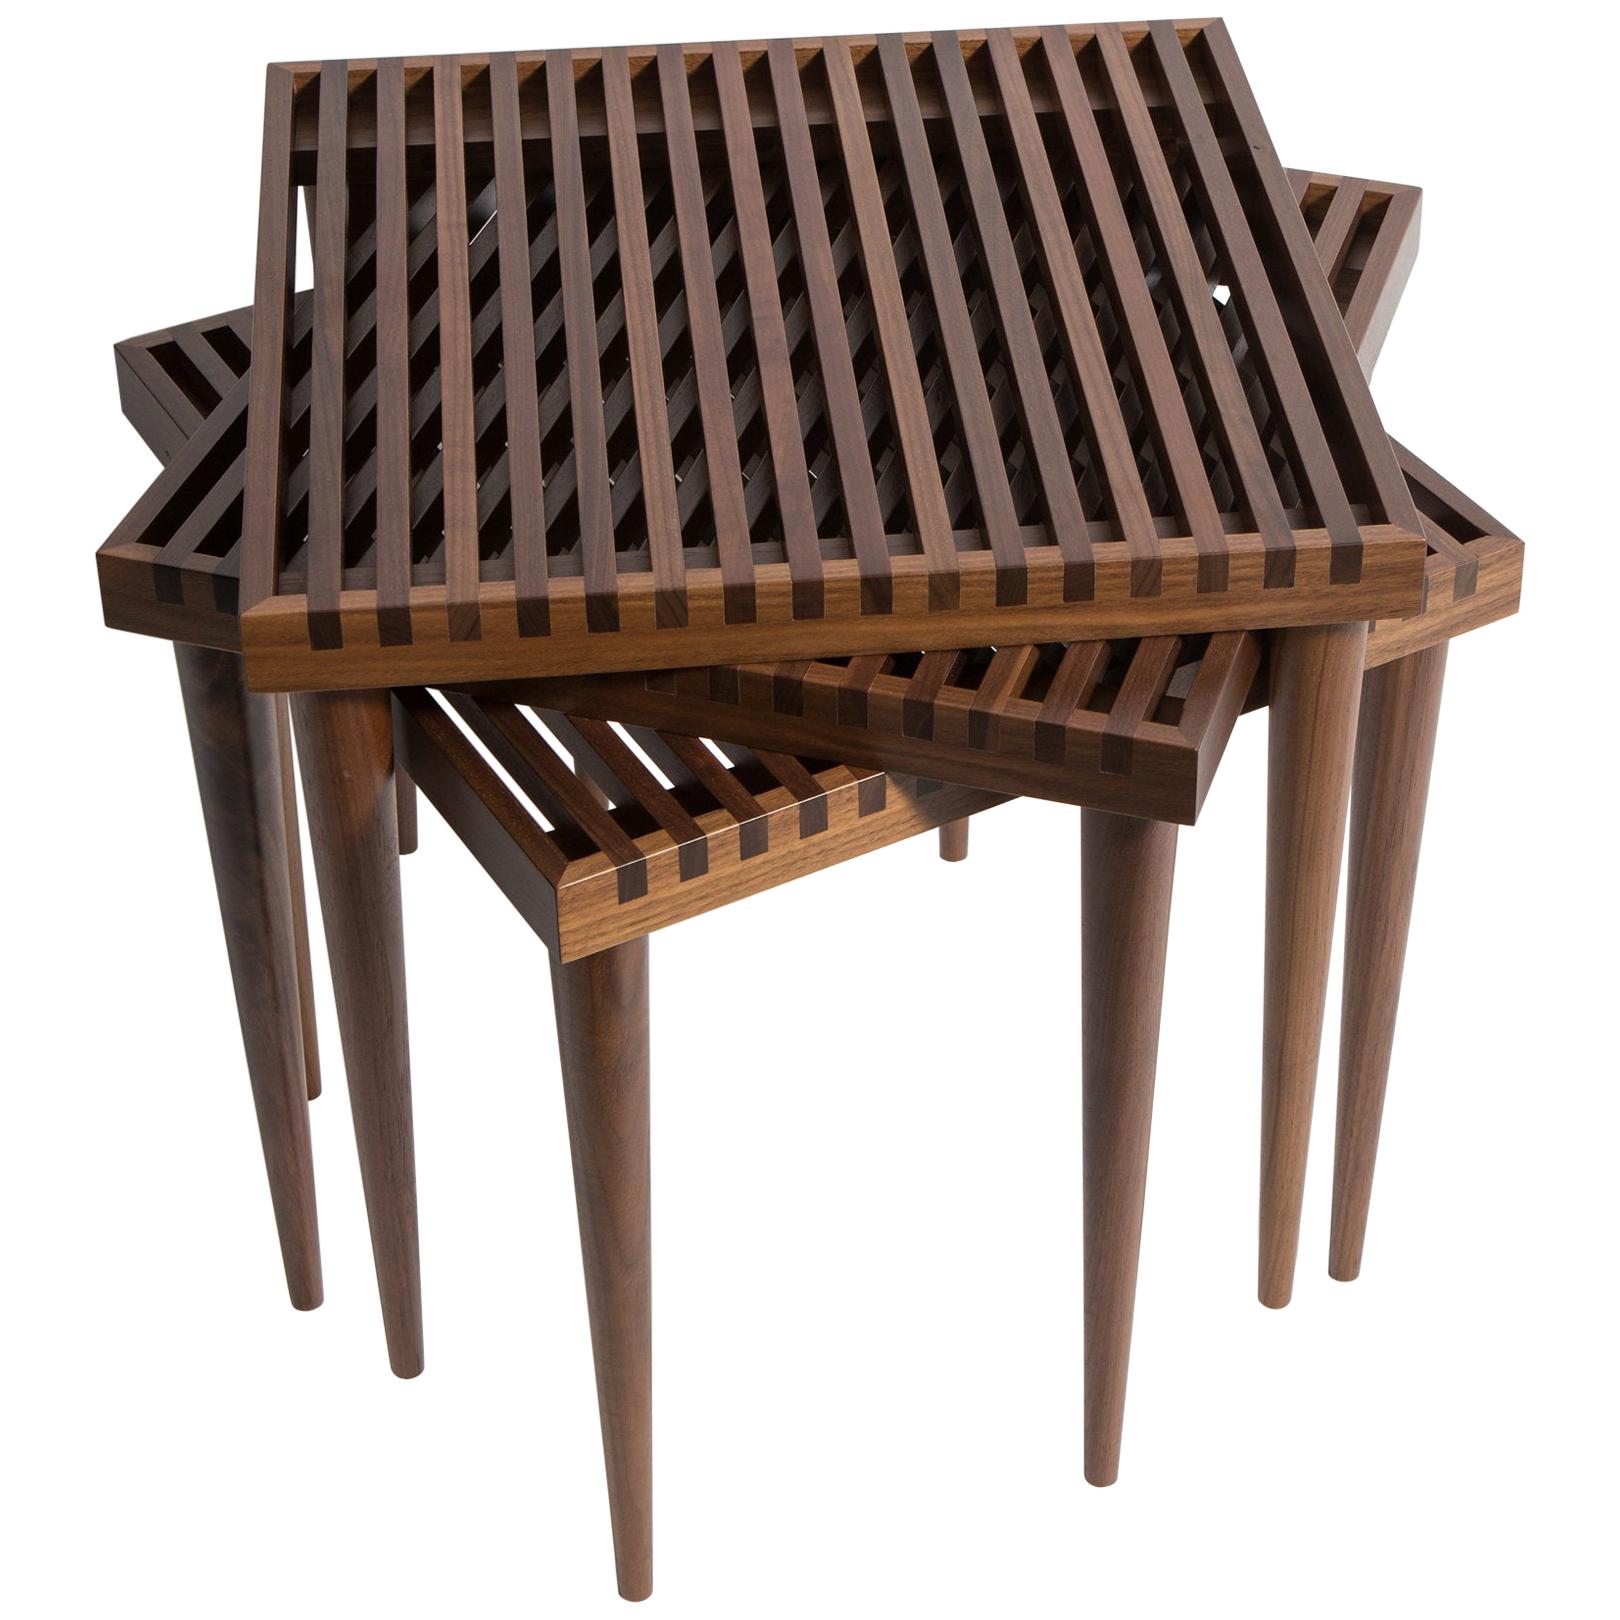 Walnut Slatted Stacking Tables by Mel Smilow